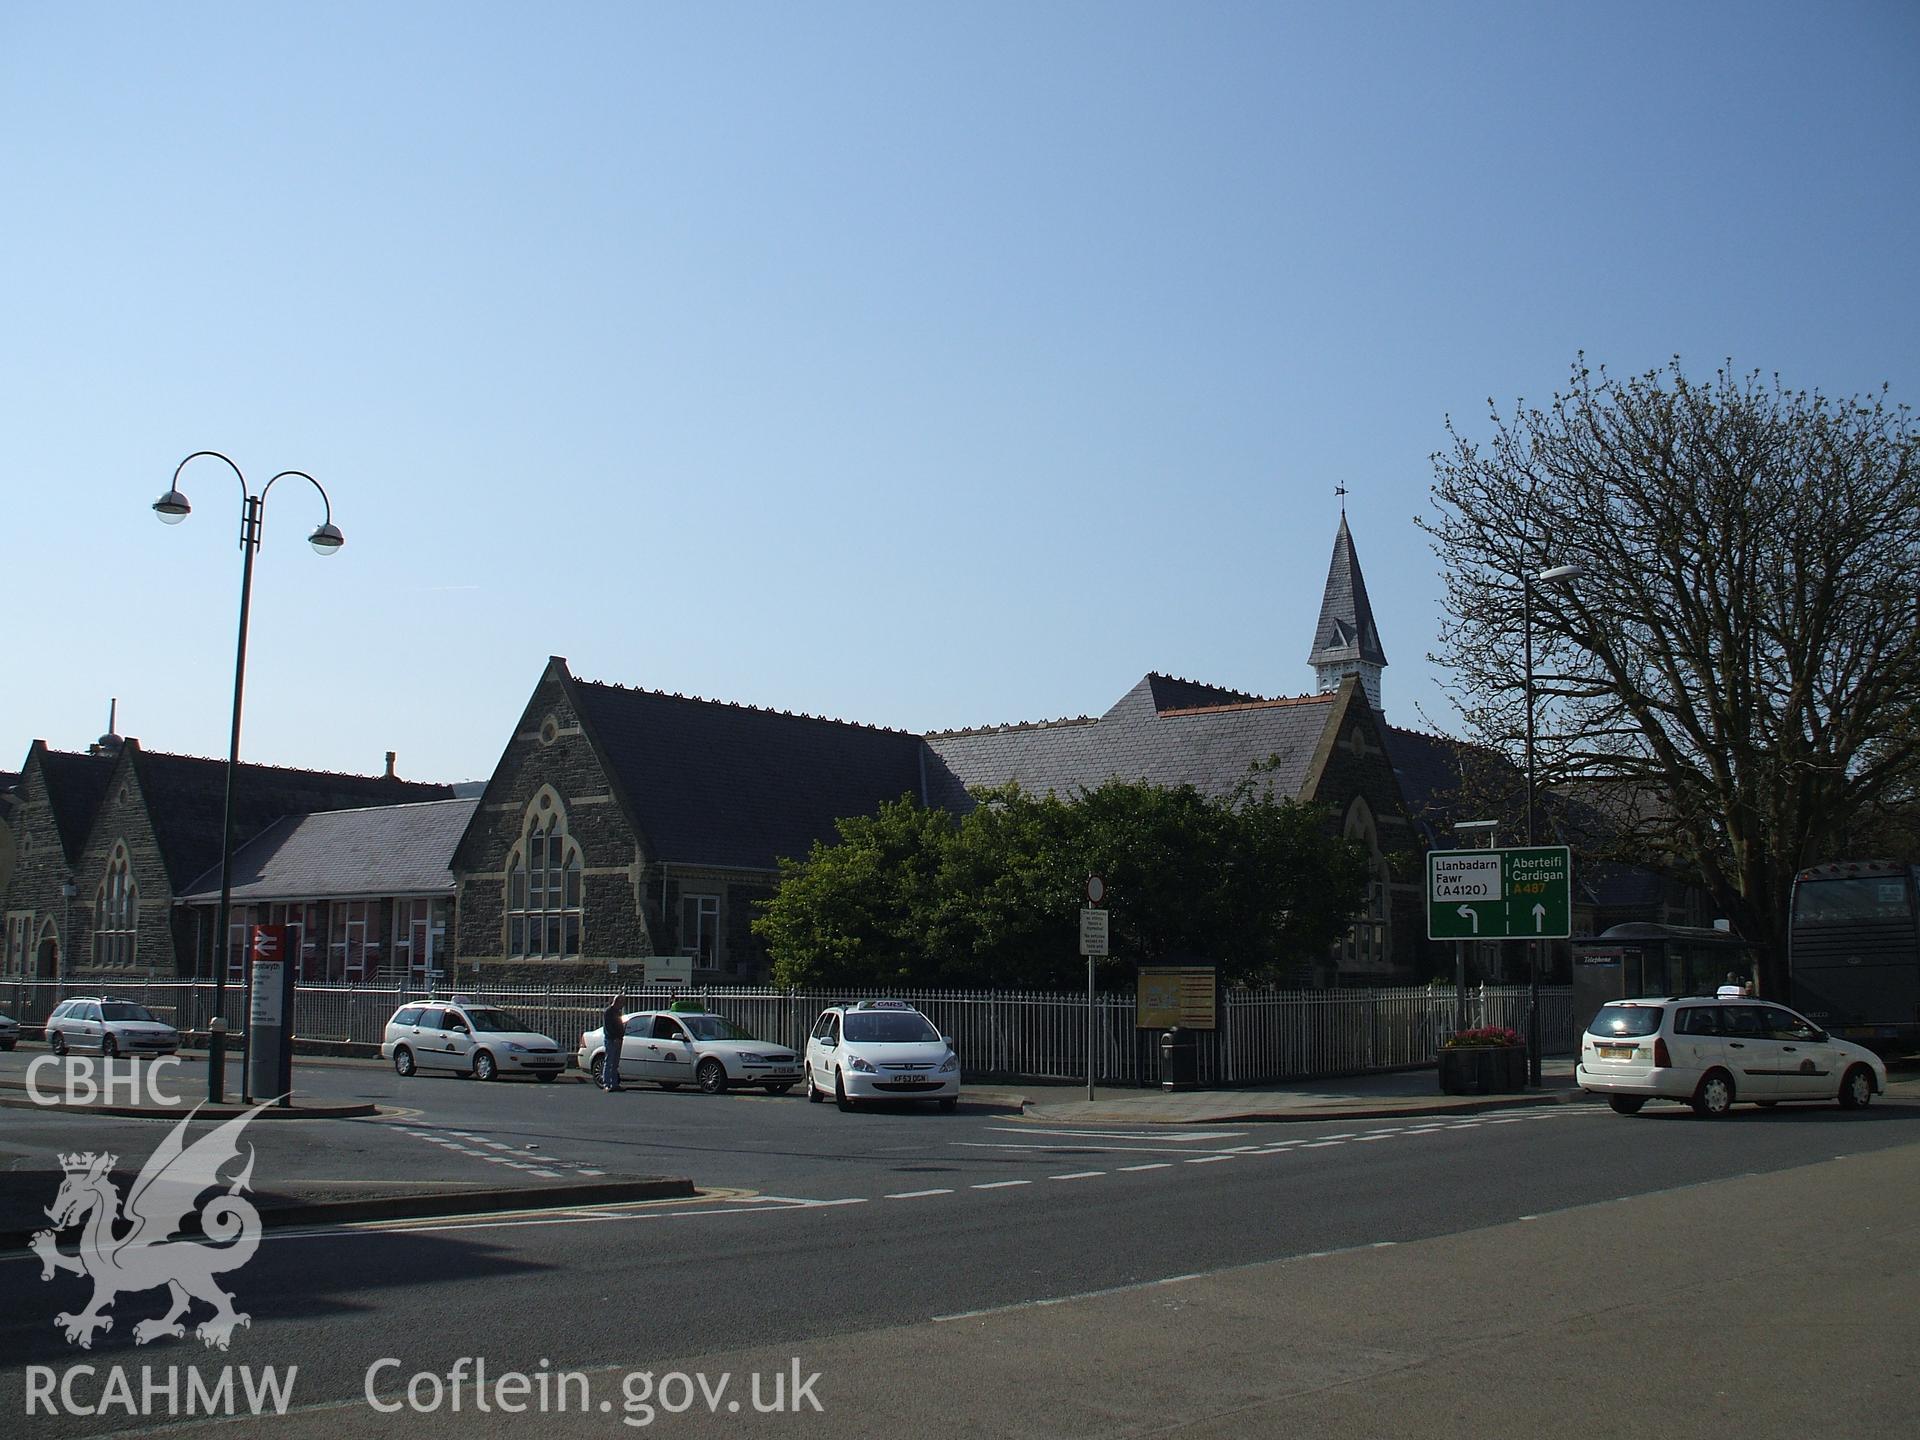 Colour digital photograph showing the exterior of the Welsh Board school, Alexandra Road, Aberystwyth.